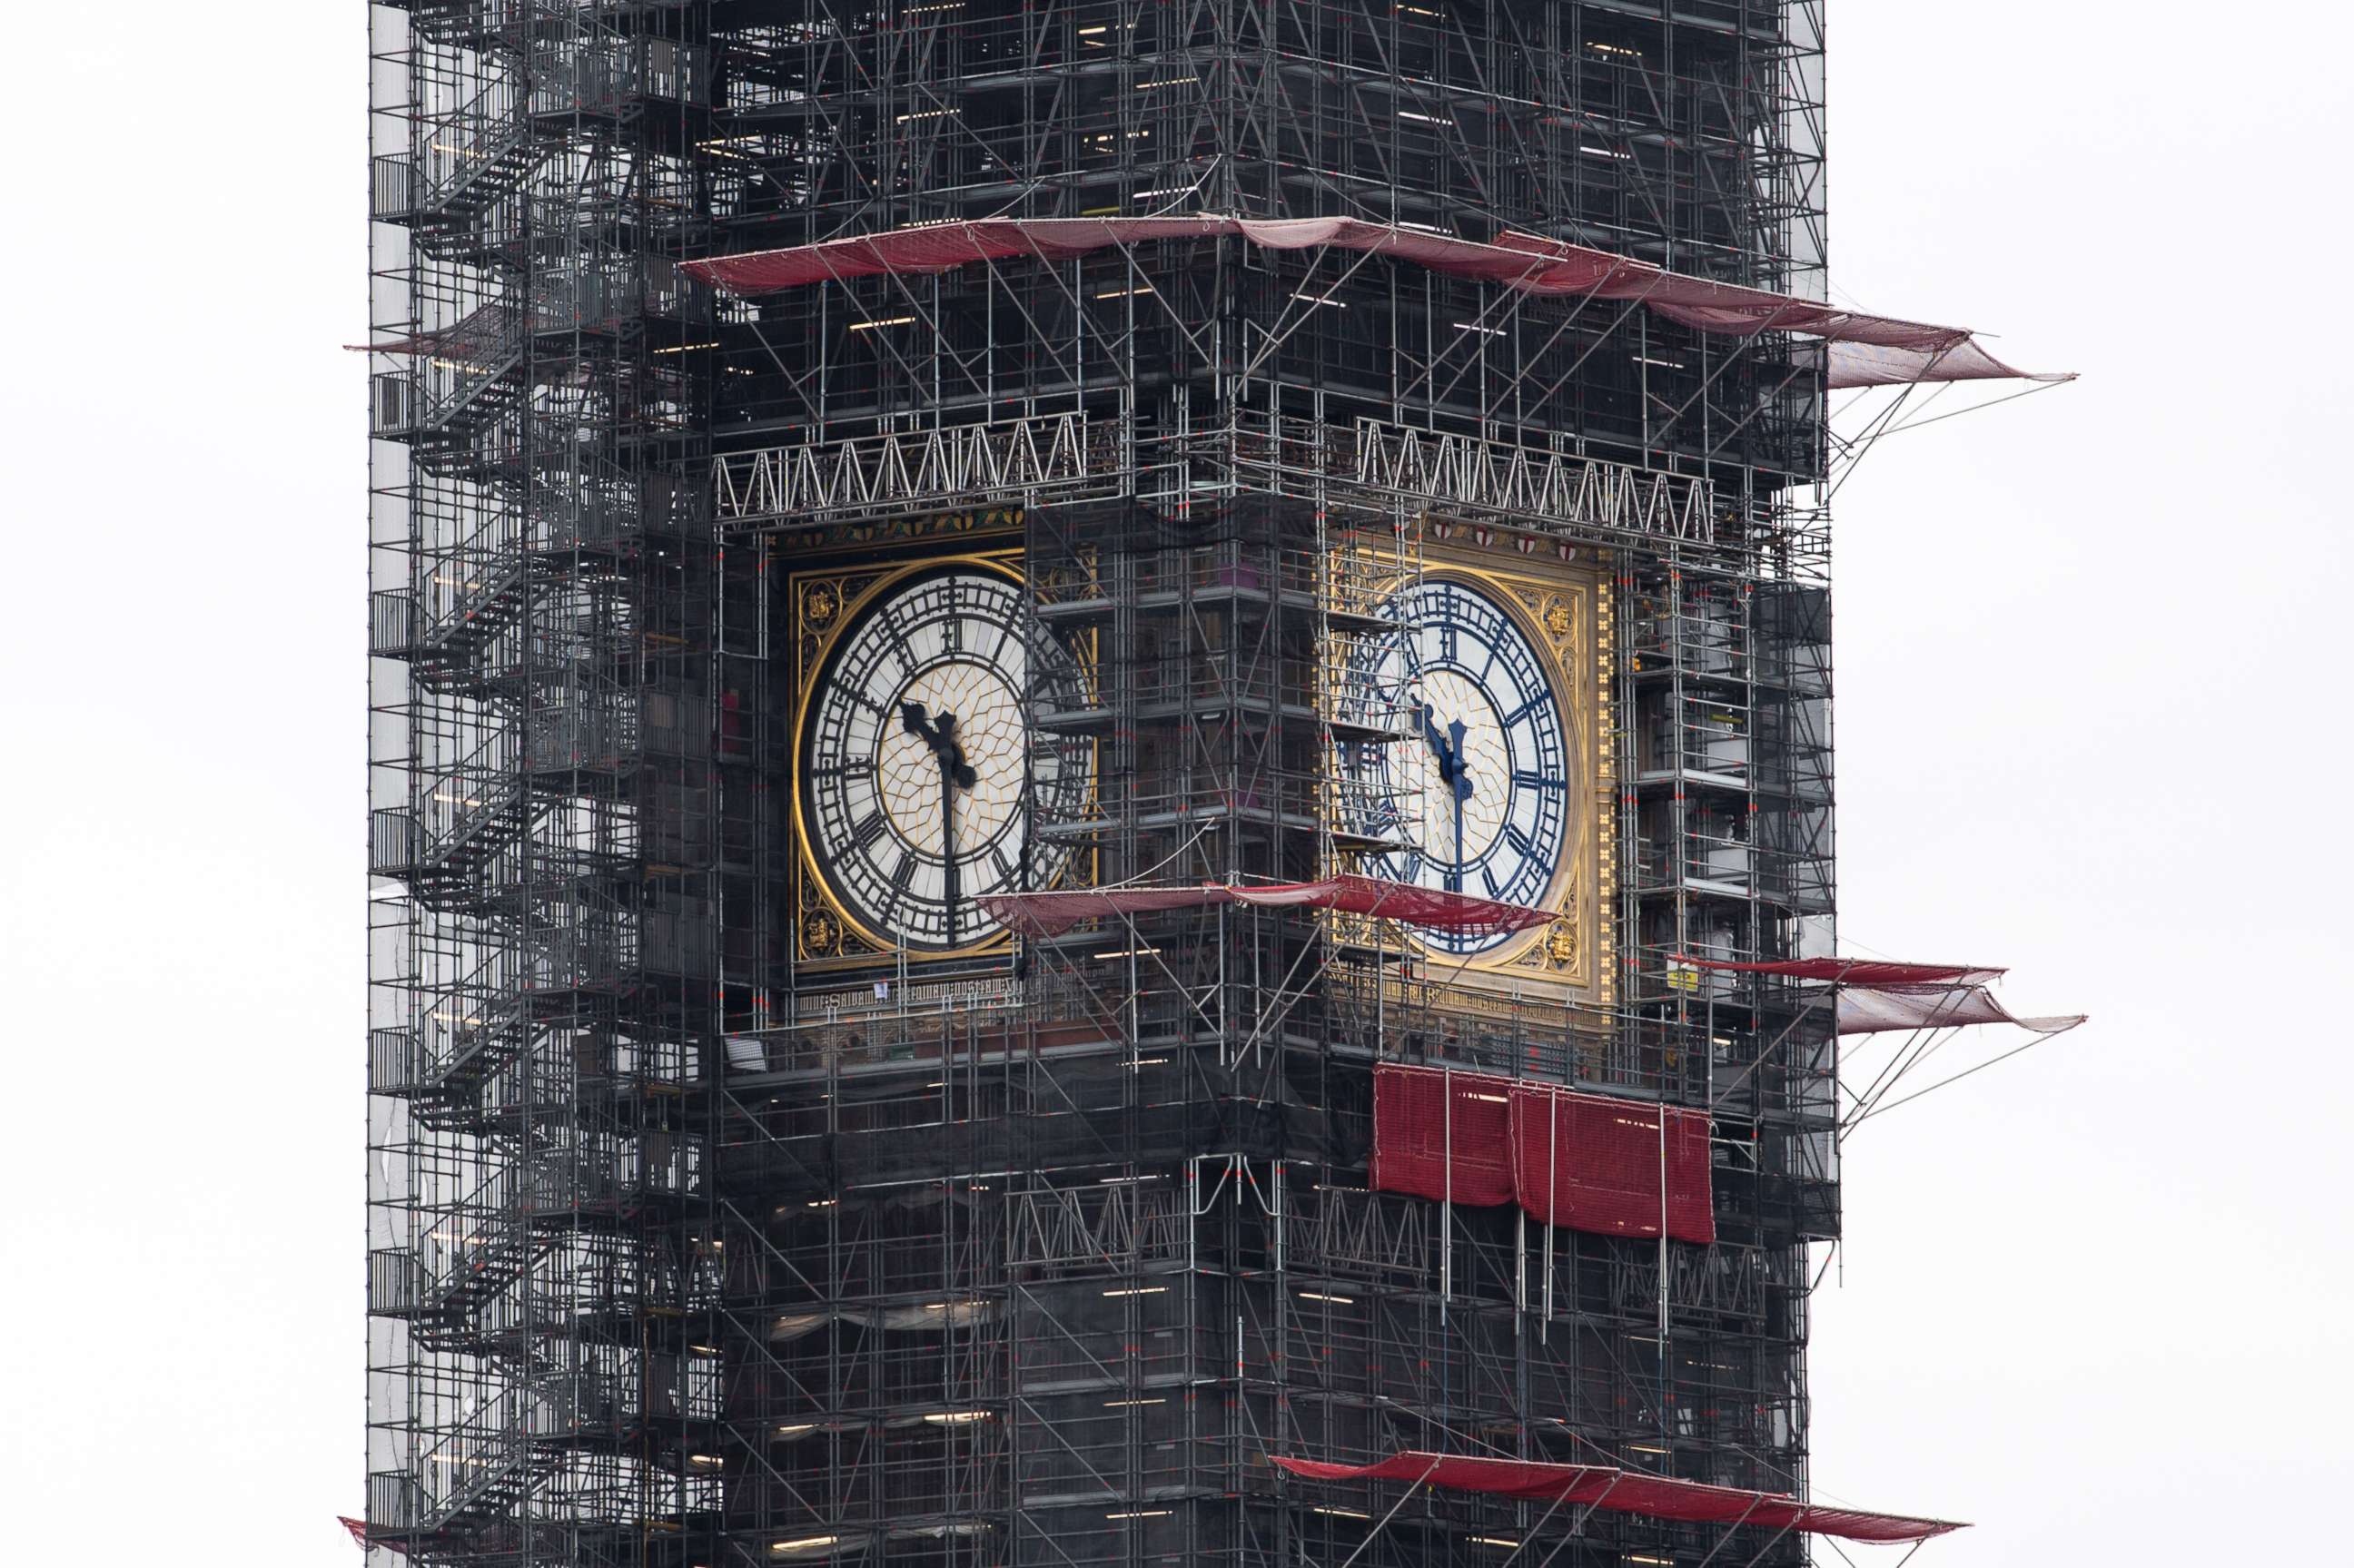 PHOTO: A part of the clock tower has been revealed for the first time since restoration work began in 2017. And it shows a mostly blue face (replacing black). 